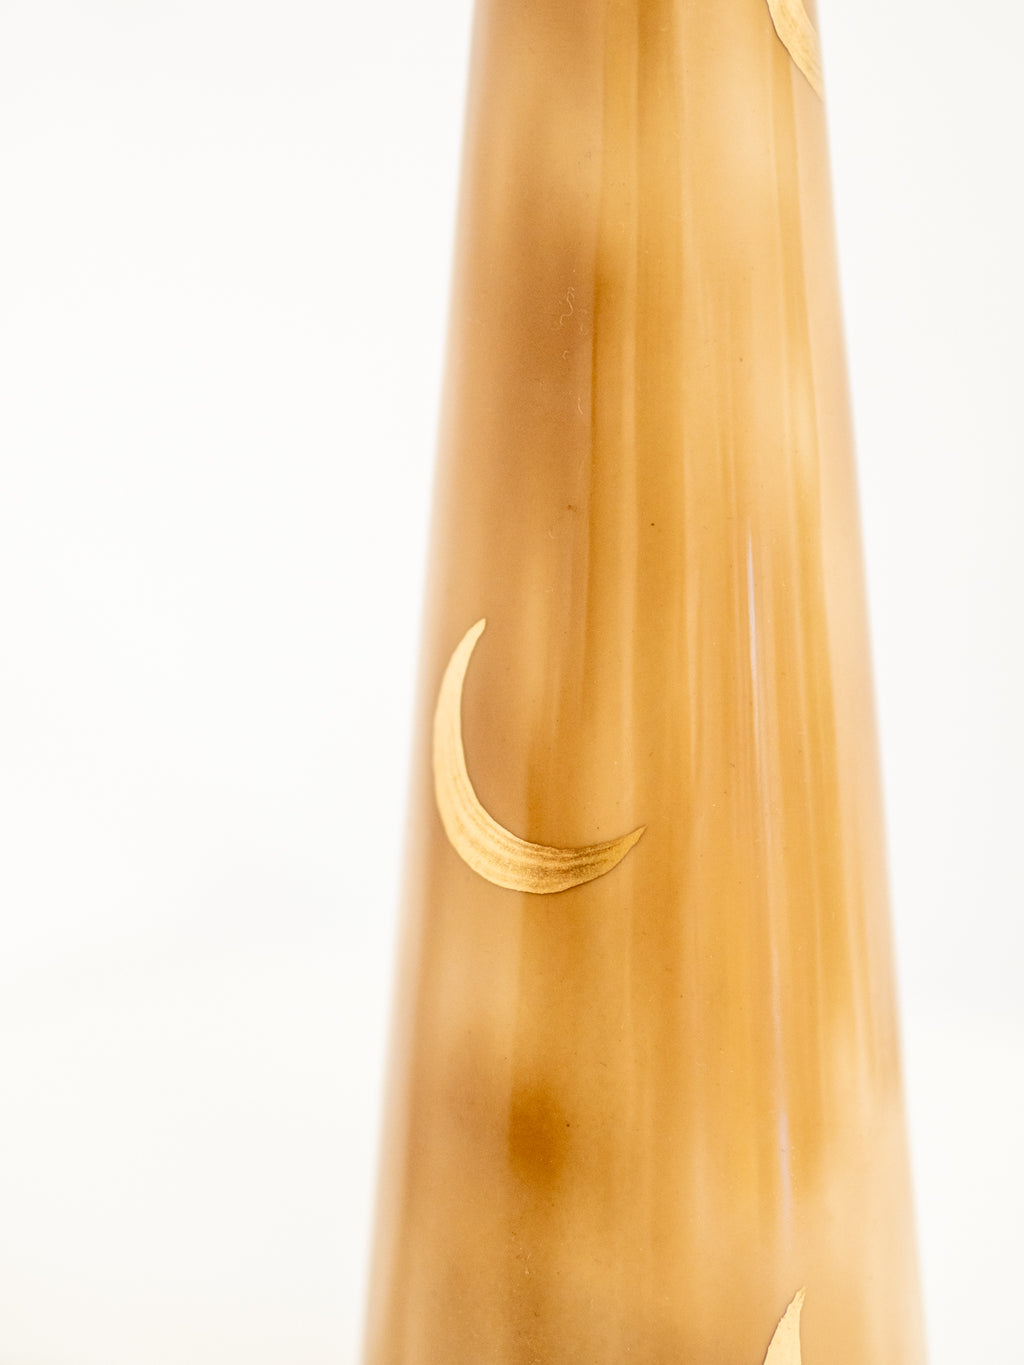 sandy TO THE MOON CANDLE HOLDER